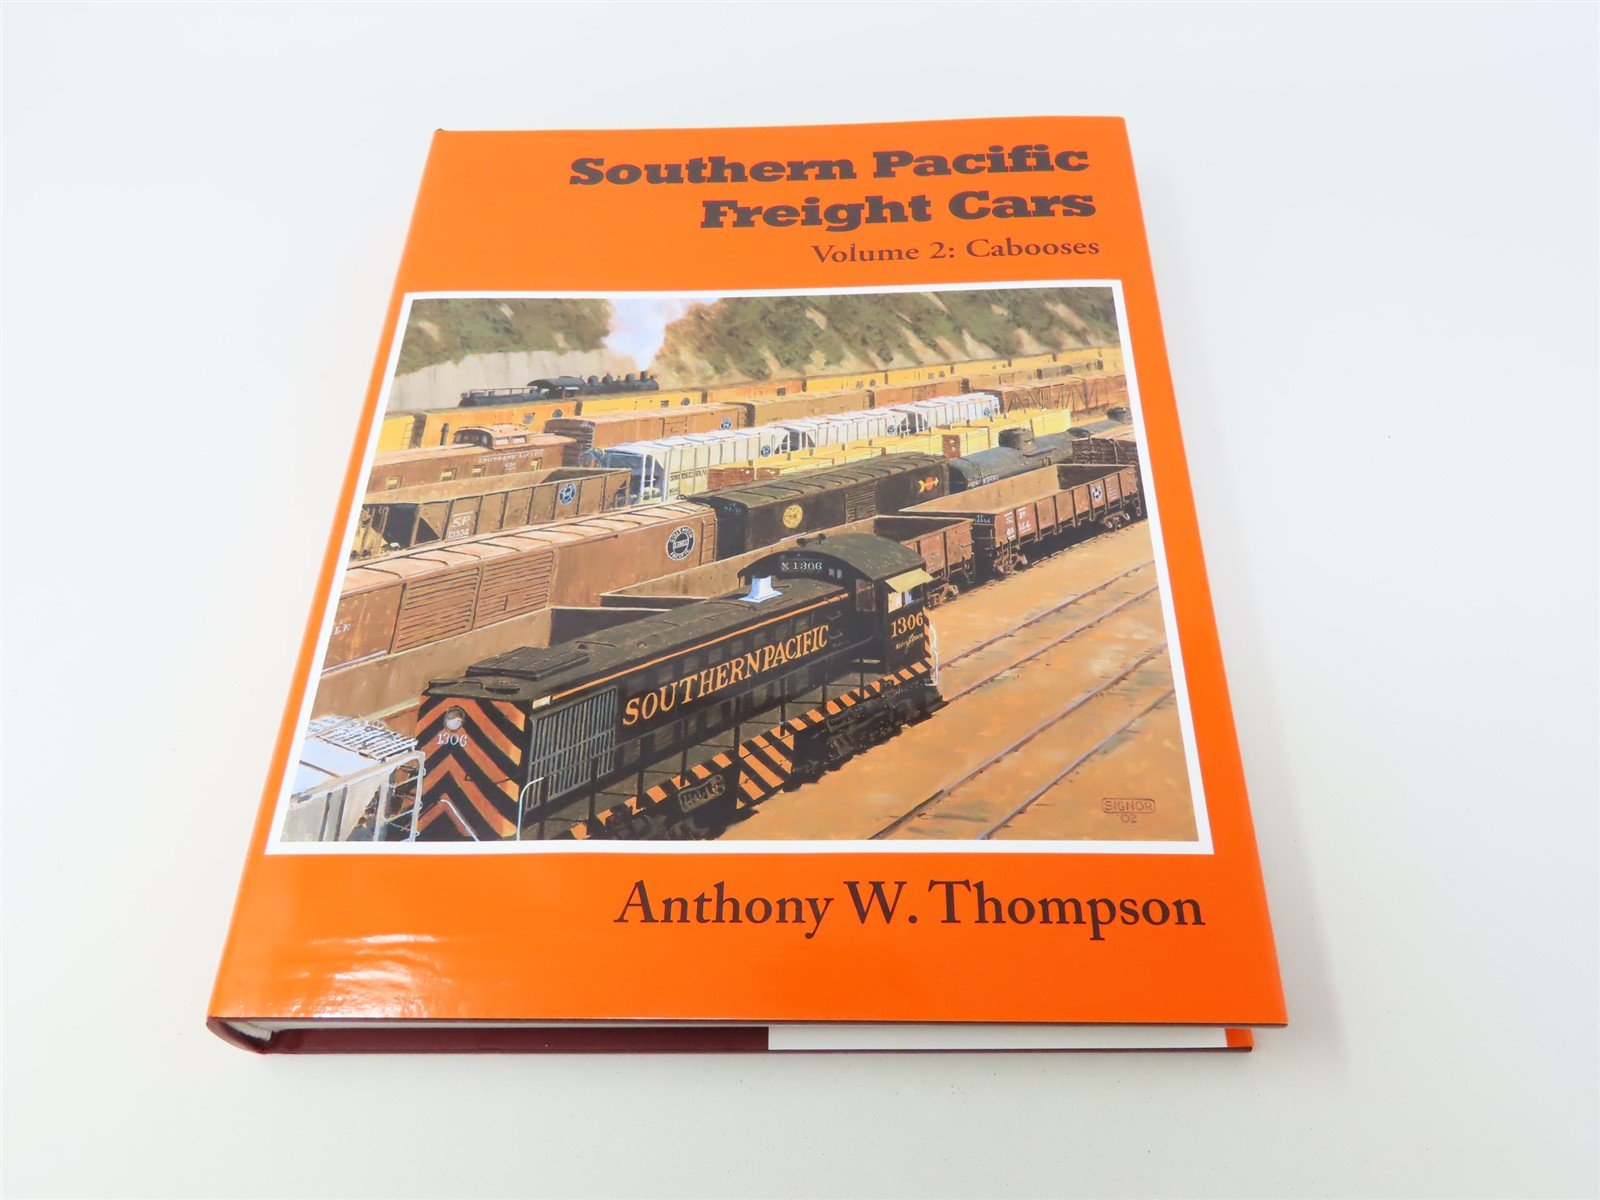 Southern Pacific Freight Cars Vol. 2 by Anthony W Thompson ©2002 HC Book